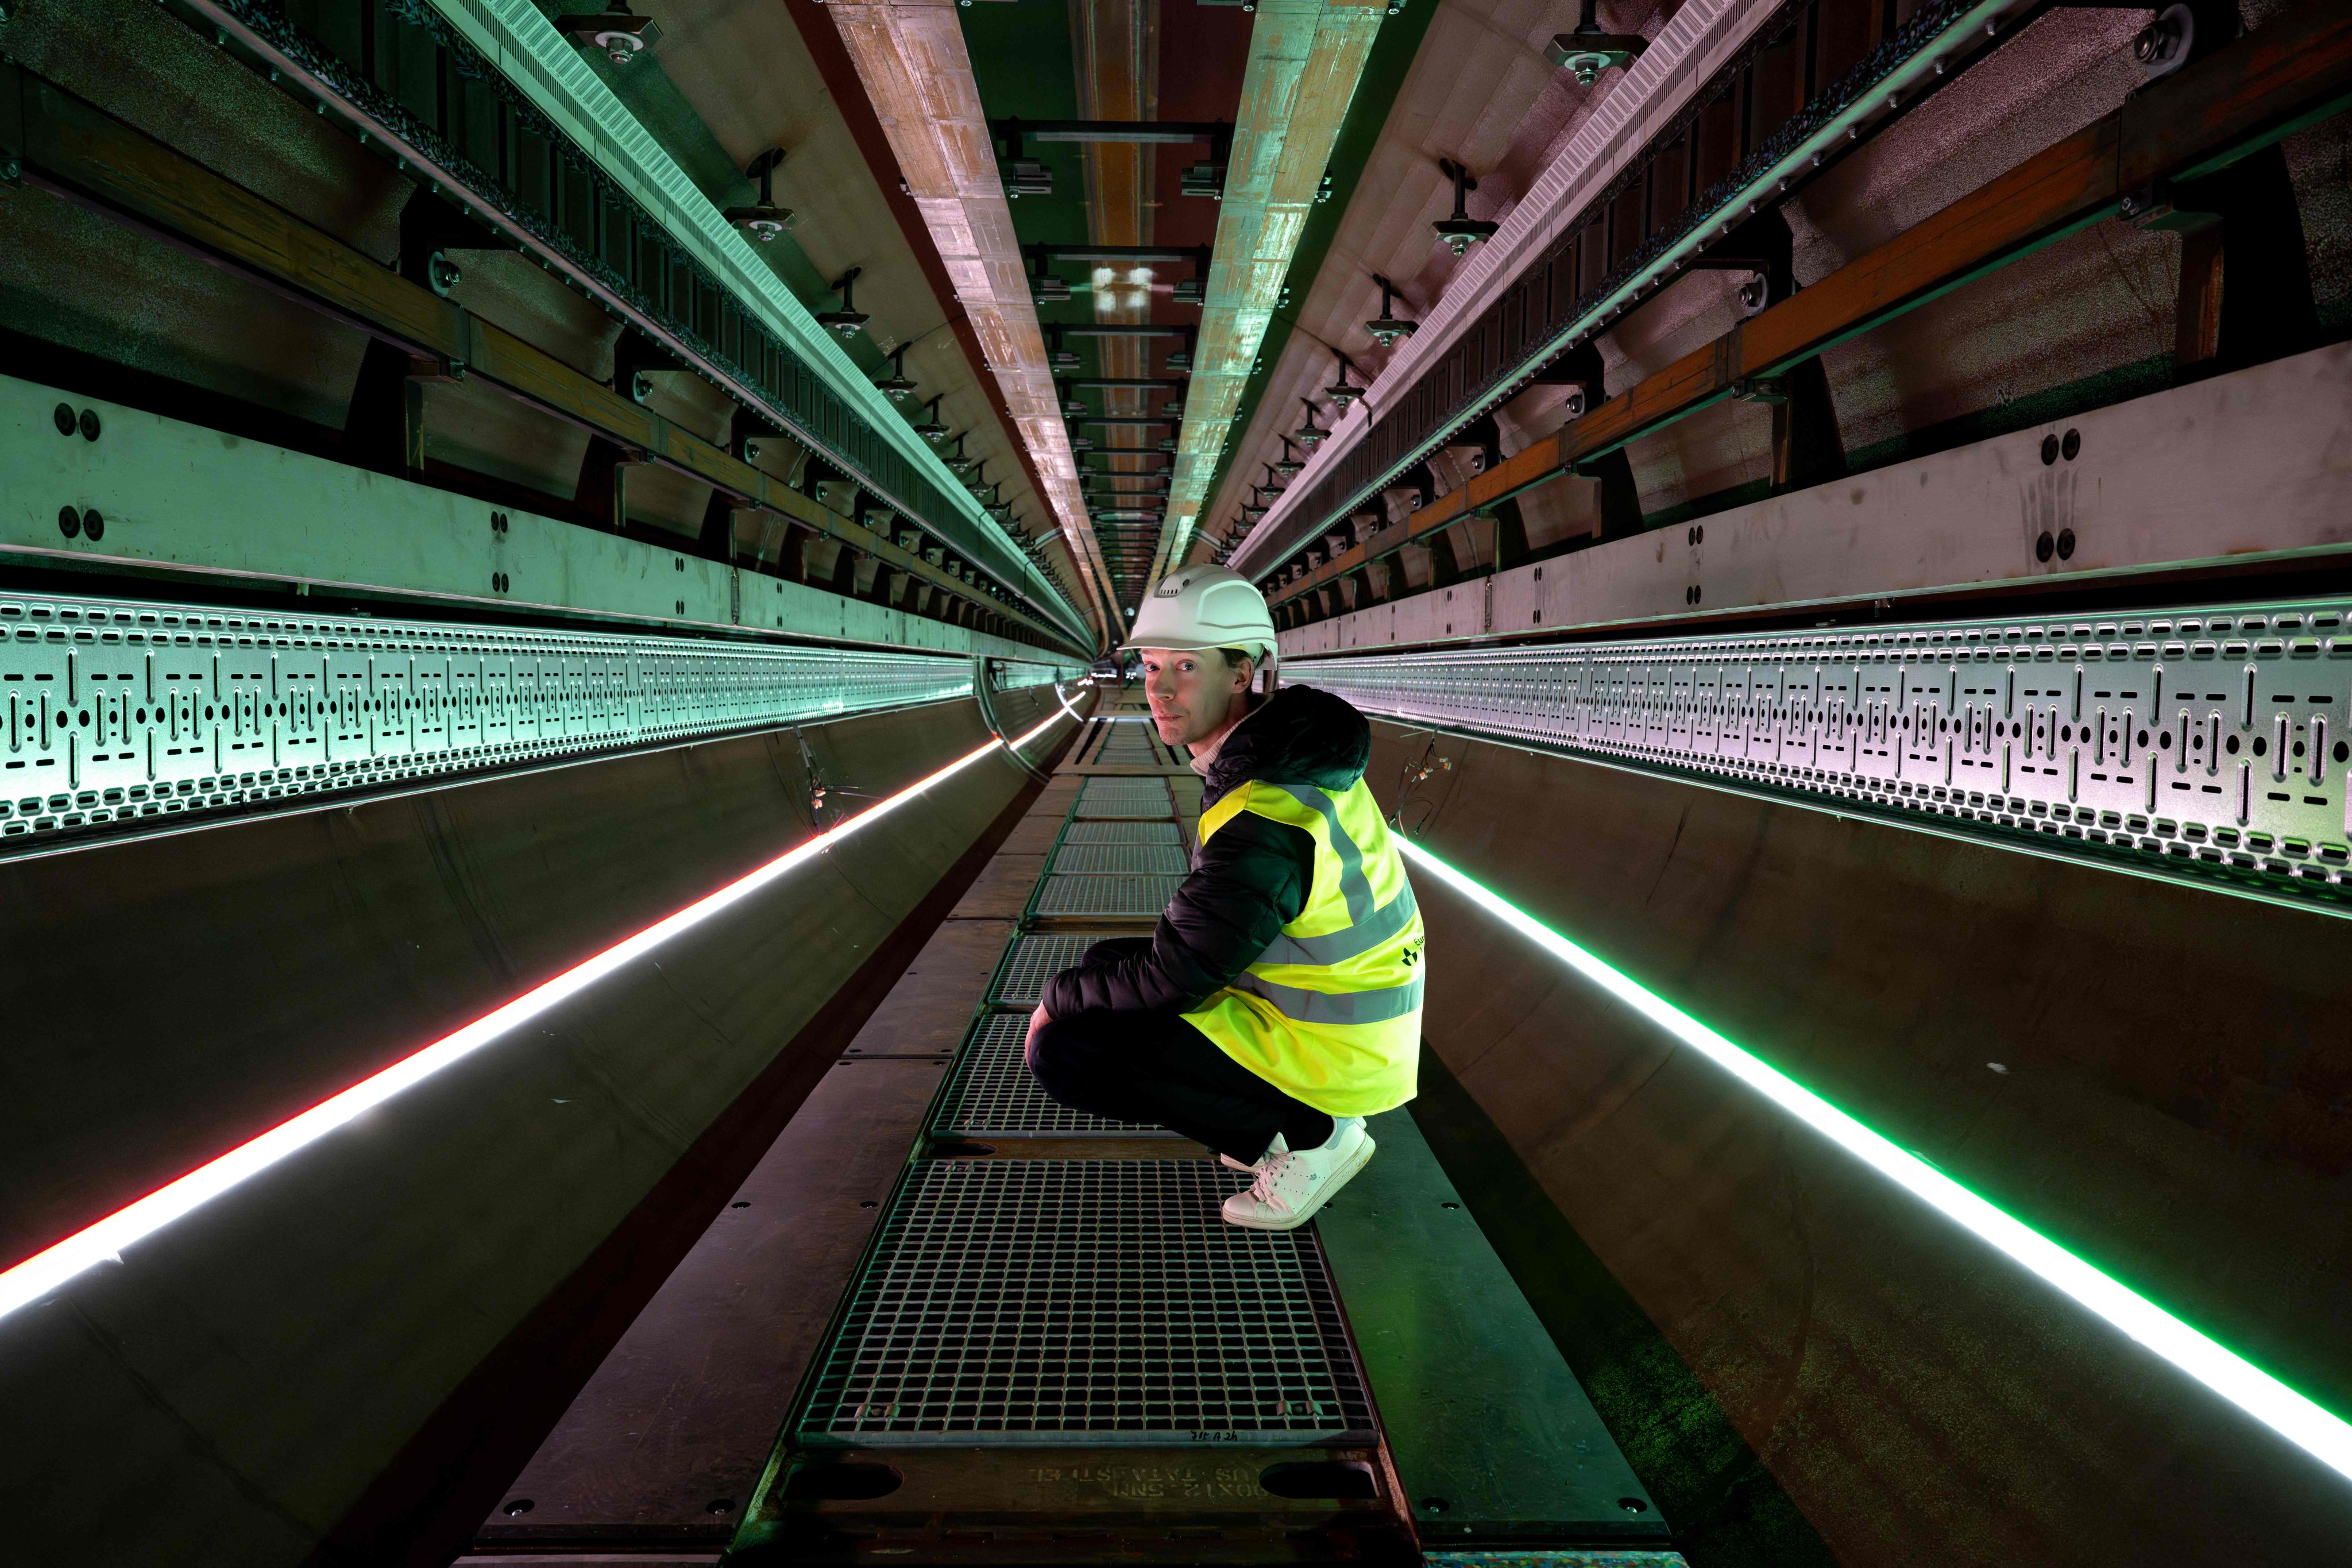 Europe’s longest tunnel for testing hyperloop technology opened last month in the Netherlands, with operators hoping passengers could one day be whisked from Amsterdam to Barcelona in a couple of hours. Photo: AFP